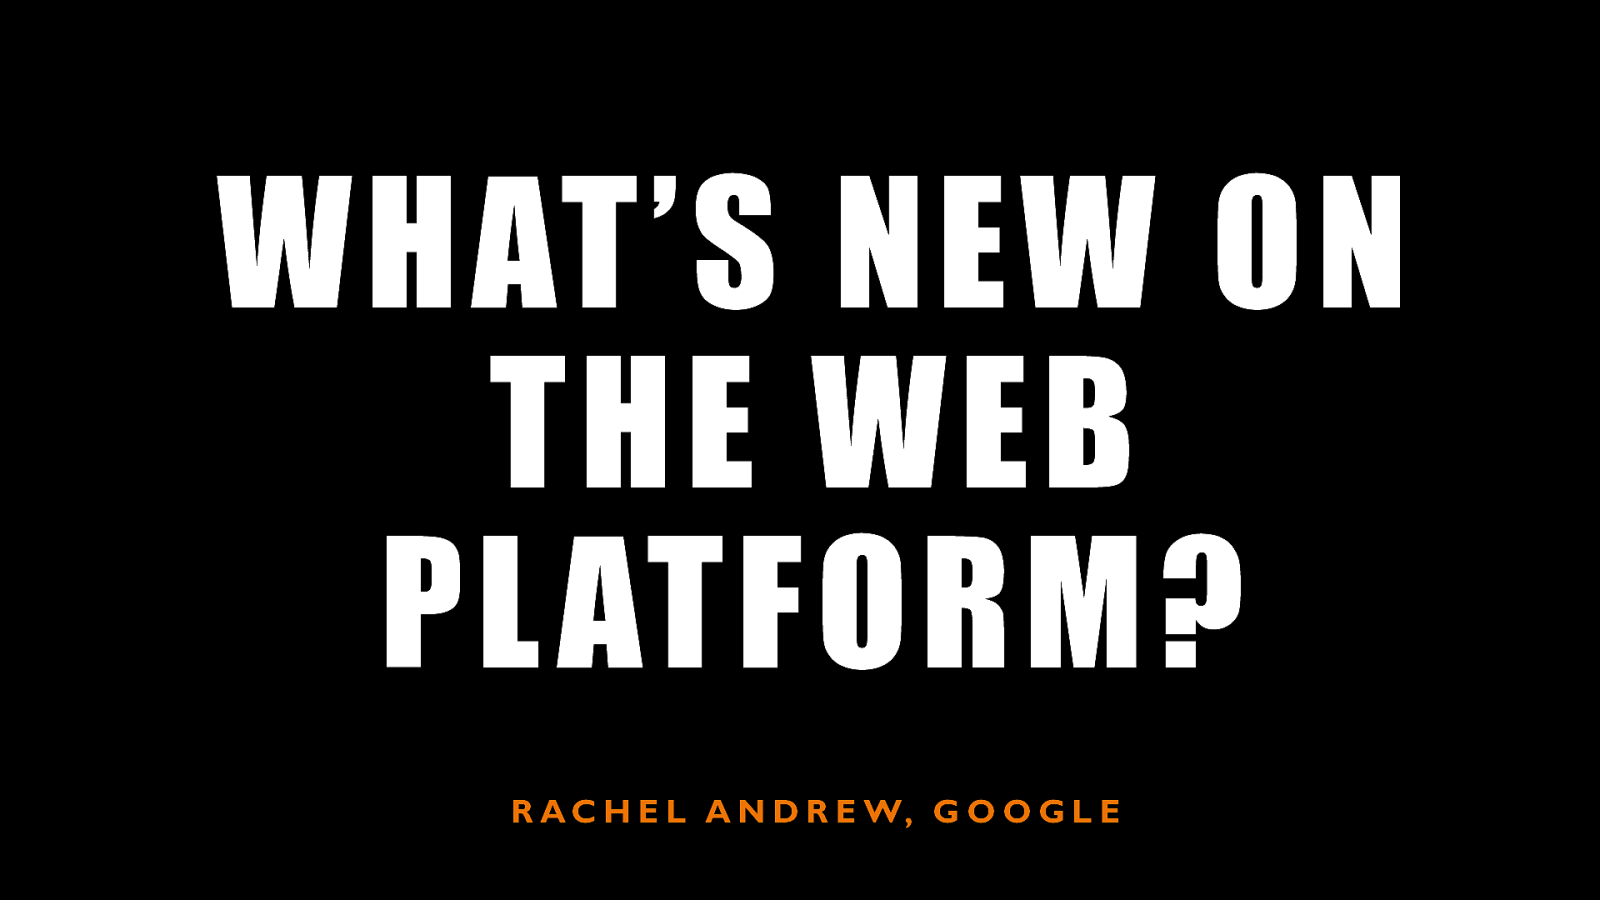 What’s new on the web platform? by Rachel Andrew